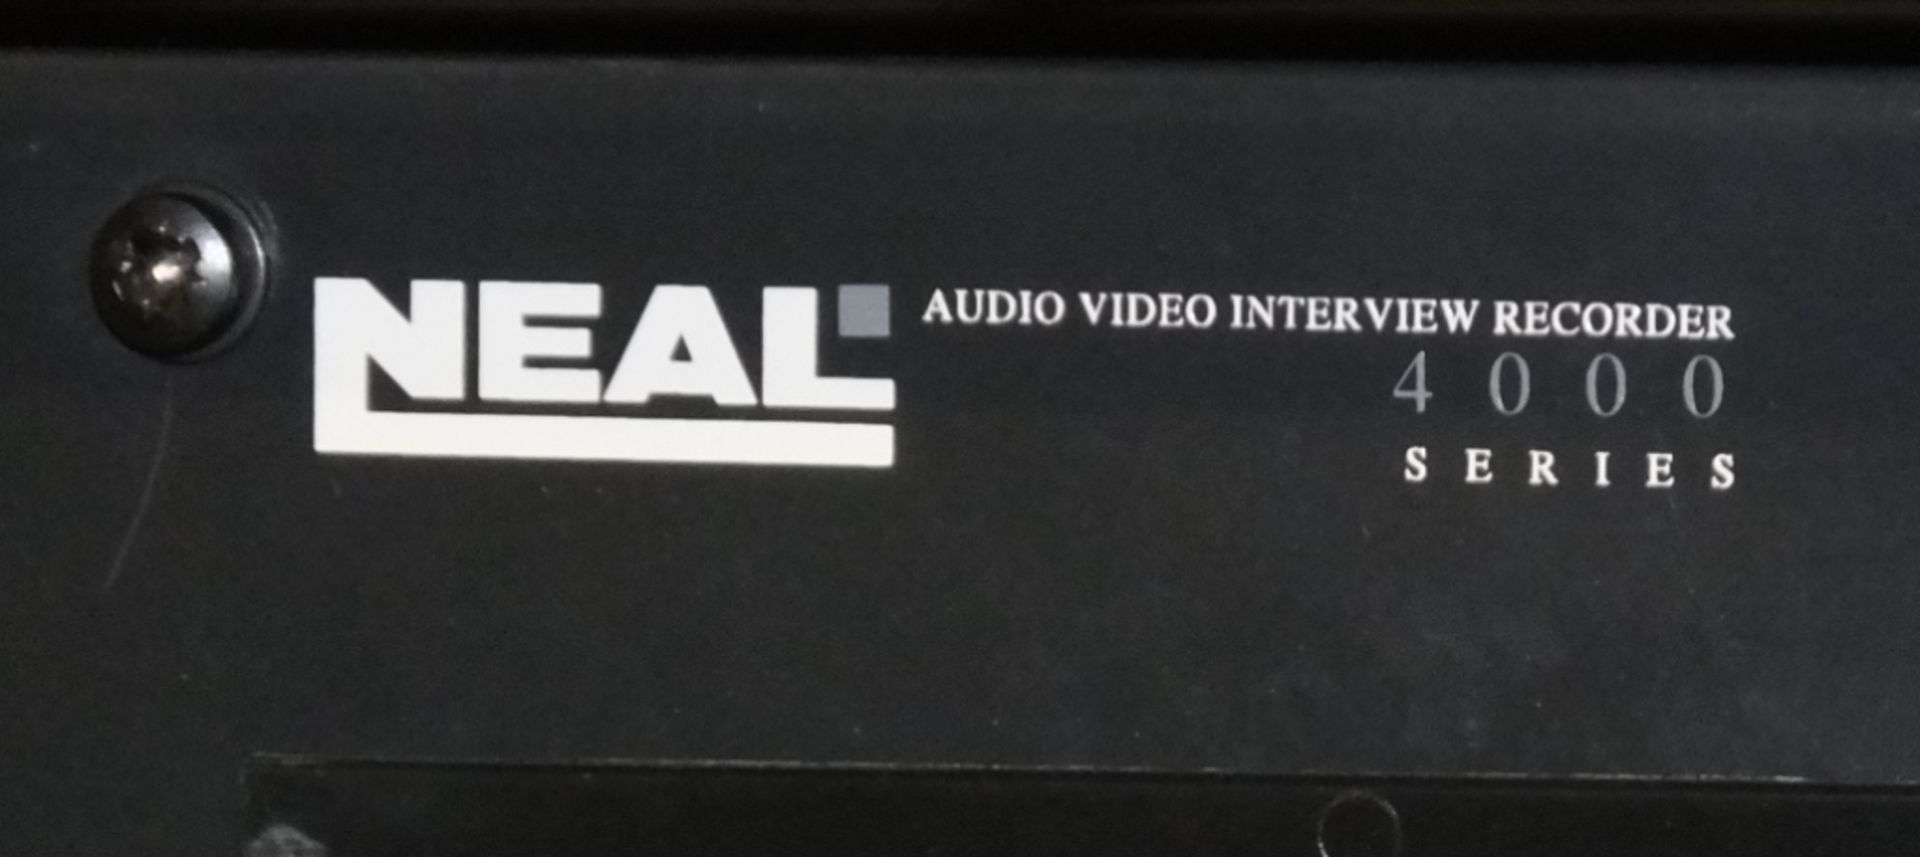 Neal 7000 series Interview recorder - Audio & Video - Hexa Chain monitor - Image 4 of 4